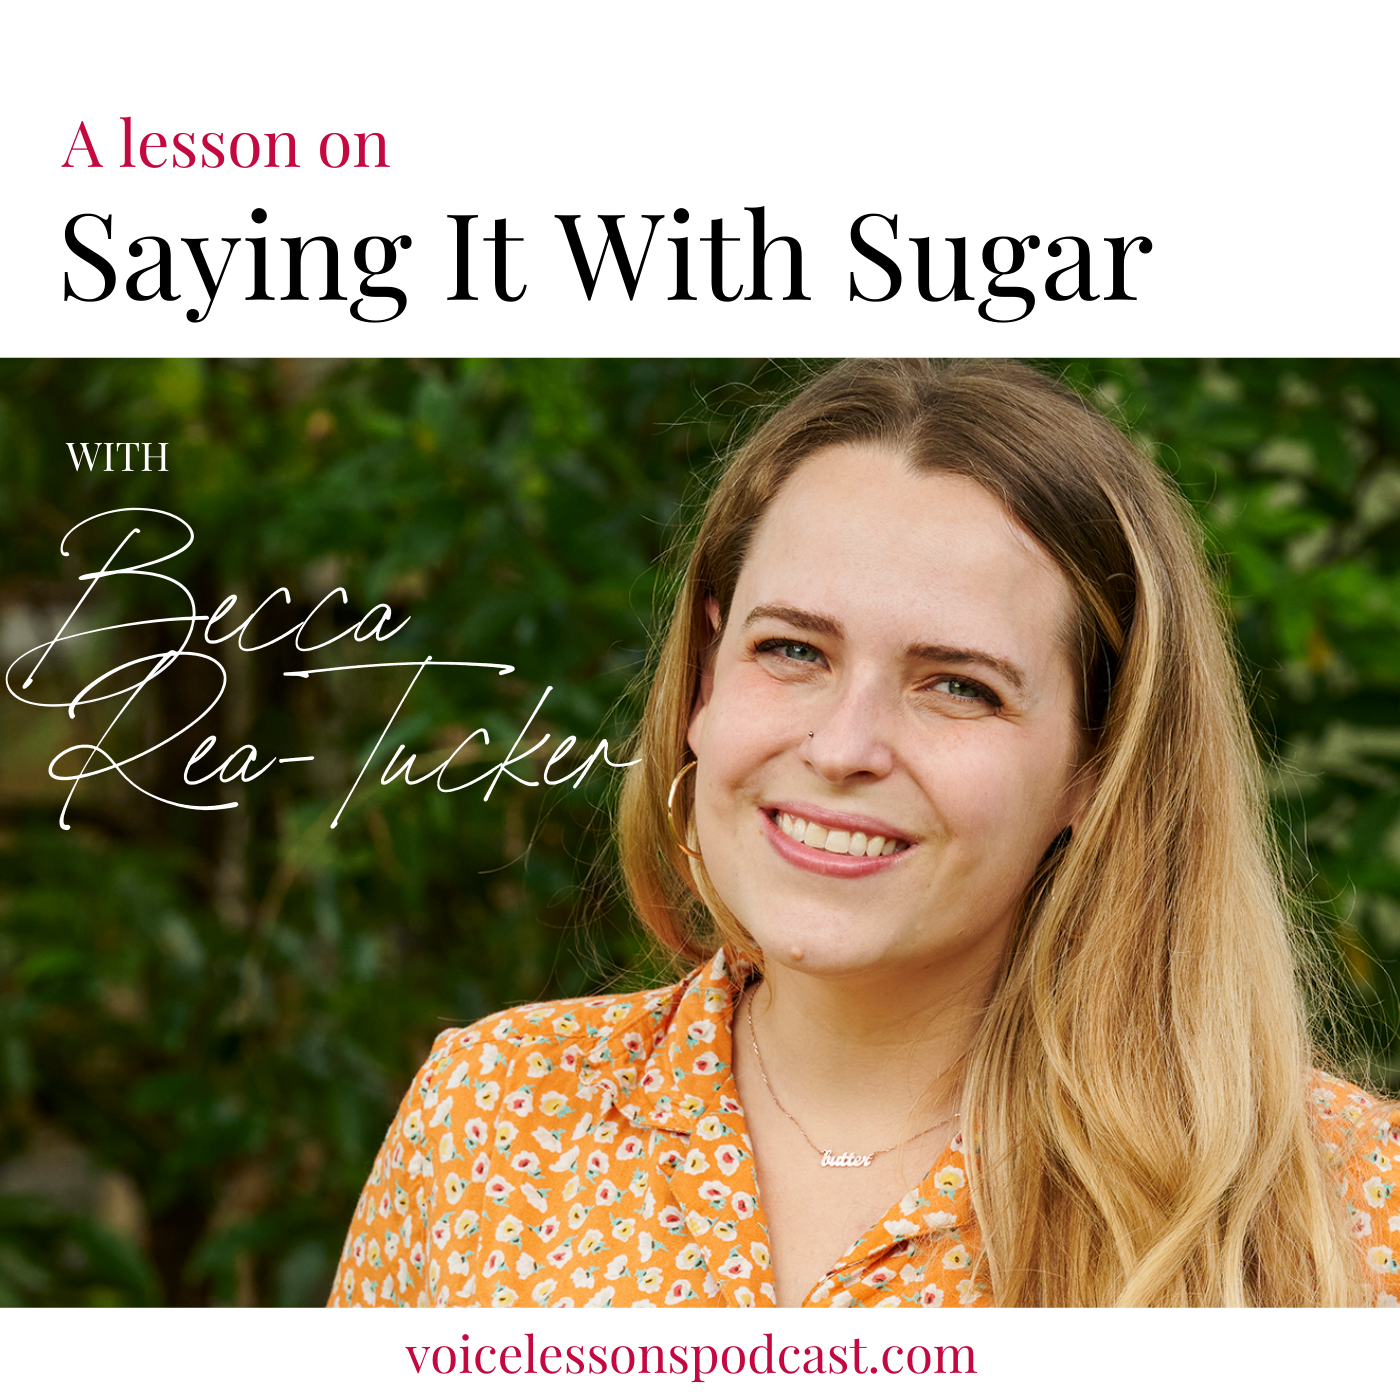 A_Lesson_On_Saying_it_with_Sugar_Becca_ReaTucker